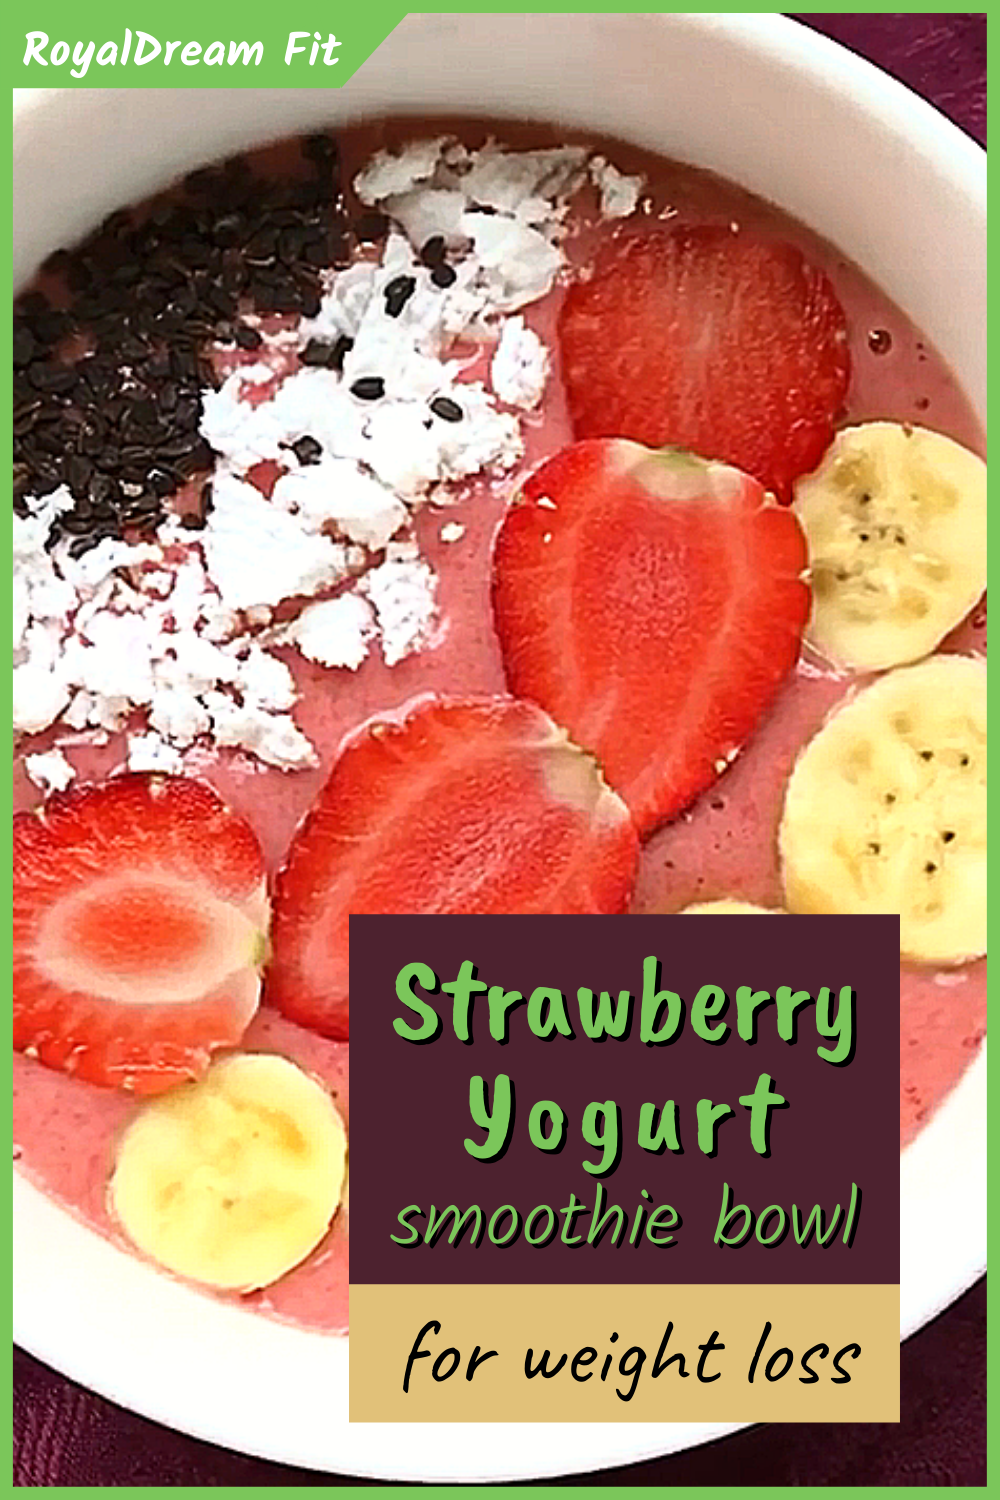 Try this creamy and delicious smoothie bowl with strawberries and yogurt!